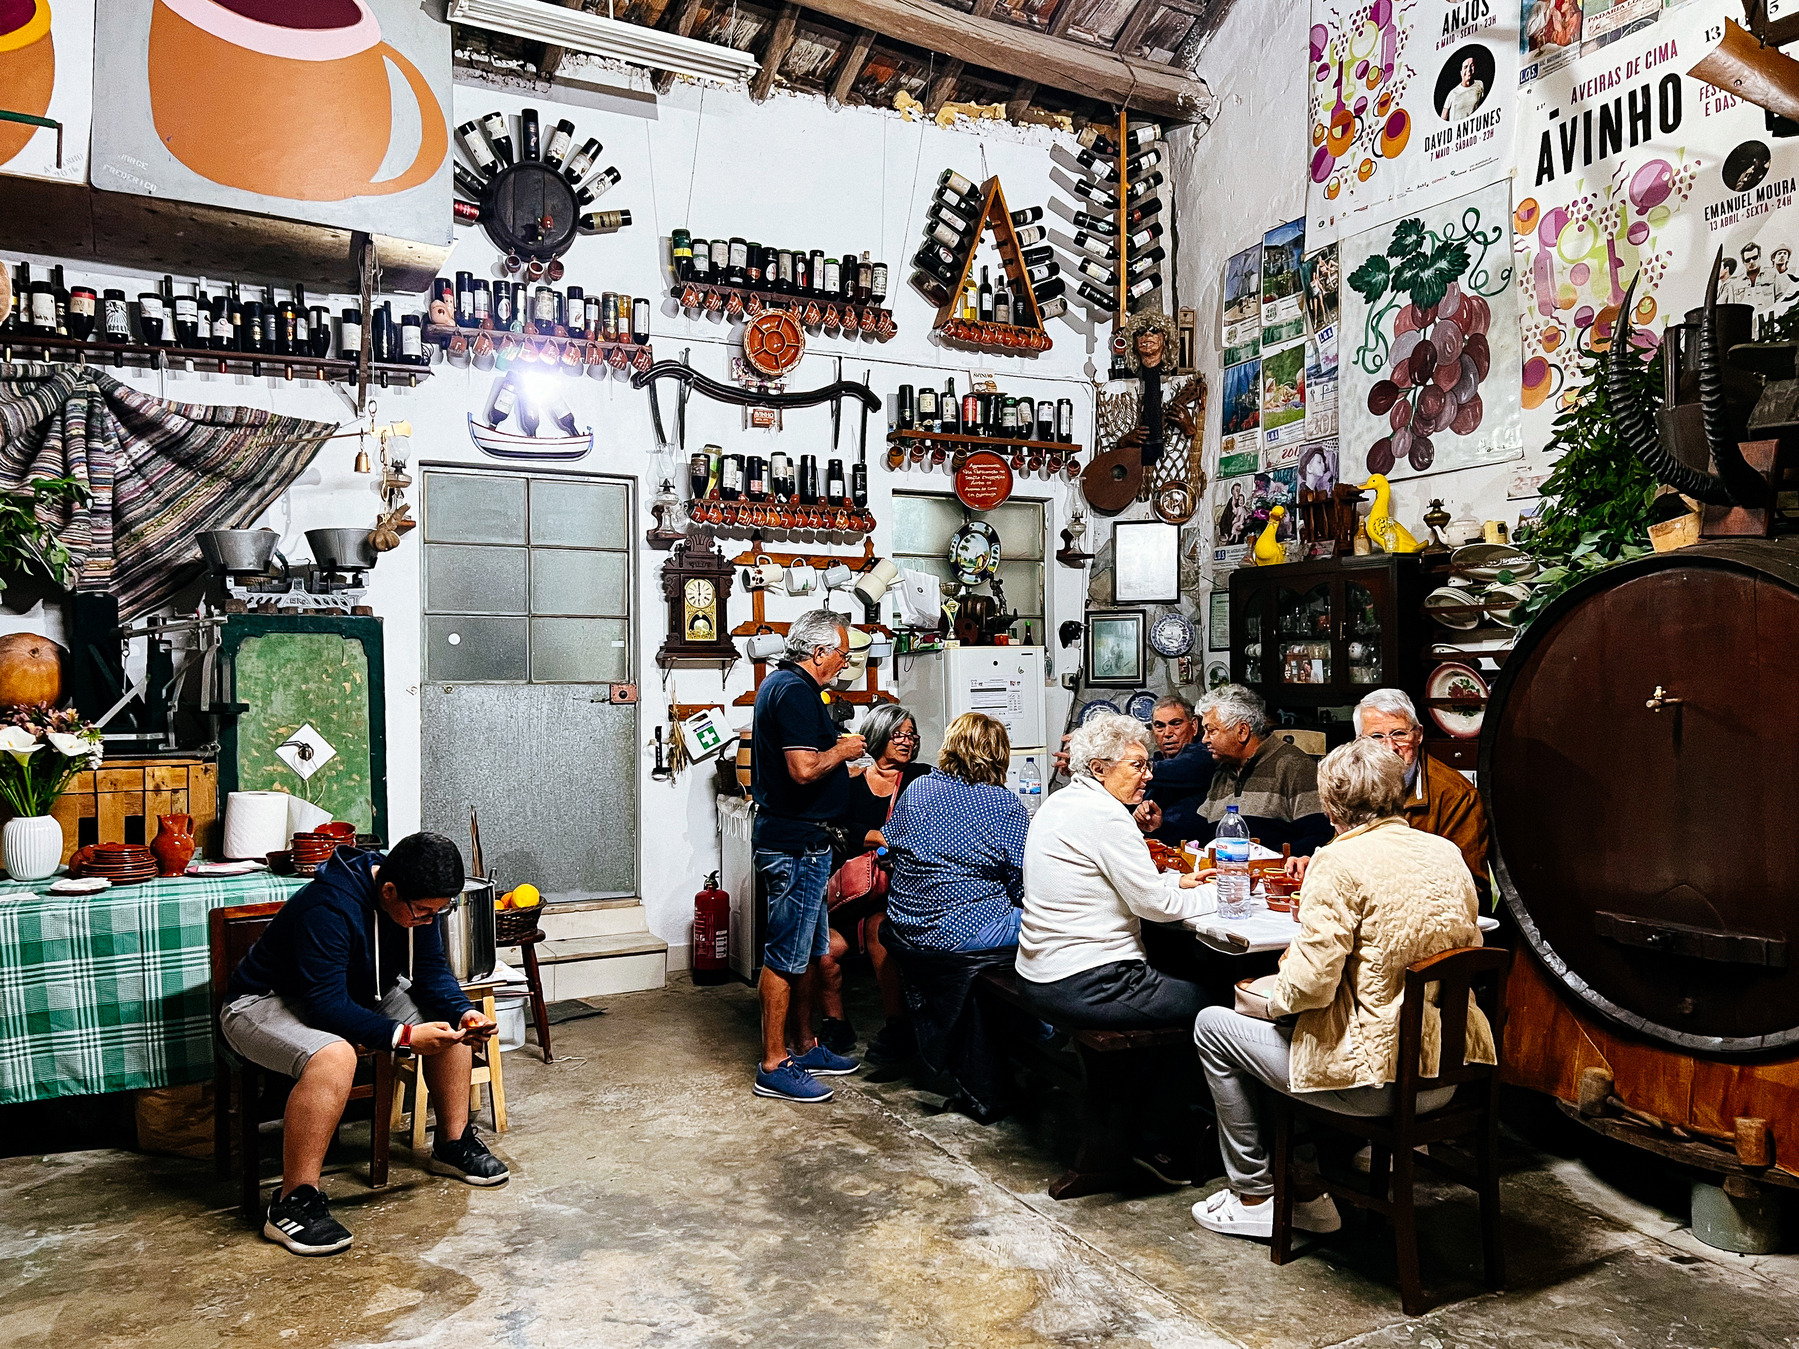 People eat sitting at a table inside a wine cellar. The walls are covered with bottles and other wine-related memorabilia.